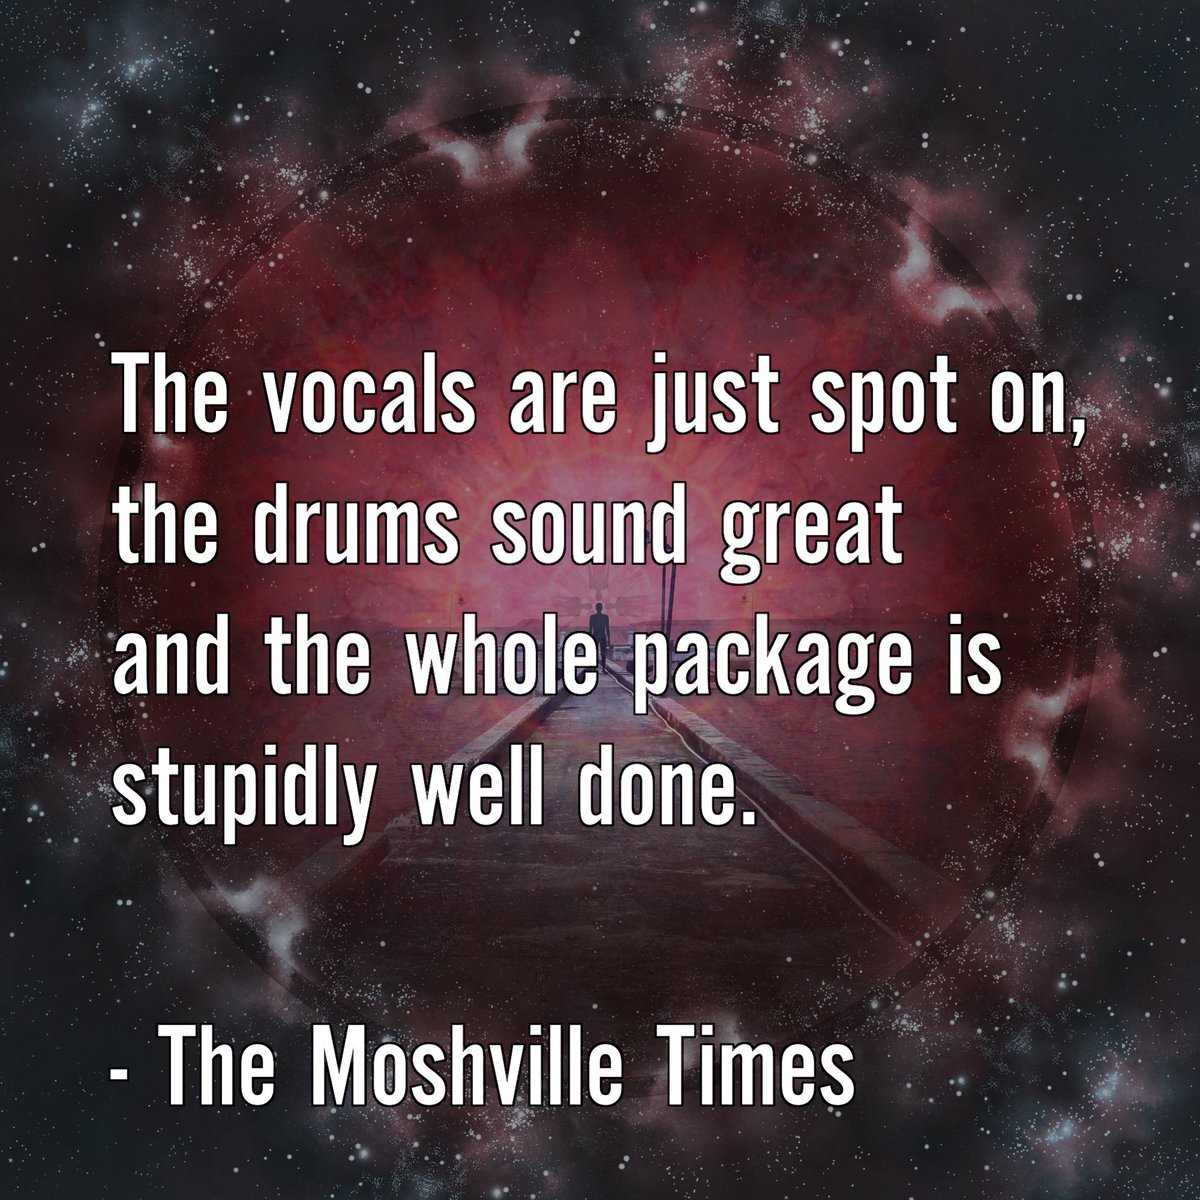 Many thanks to @MoshTimes for their absolutely brilliant review of the new @causticwaves EP, 'Full Circle'.

#causticwaves #fullcircle #review #themoshvilletimes #moshvilletimes
#alternativerock #altrock #posthardcore #altmetal #punkrock